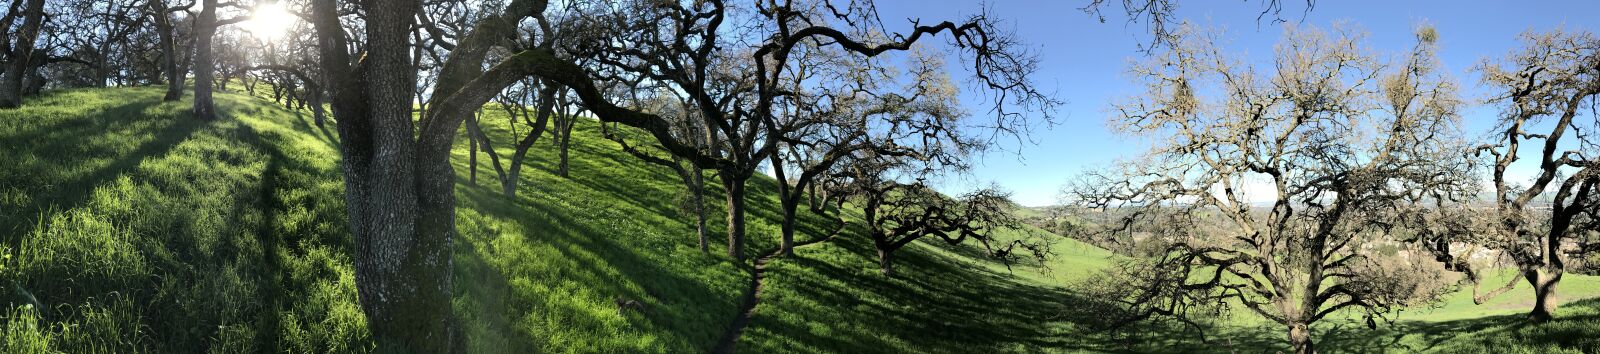 Apple iPhone 7 Plus + iPhone 7 Plus back camera 3.99mm f/1.8 sample photo. East bay, trees, hills photography